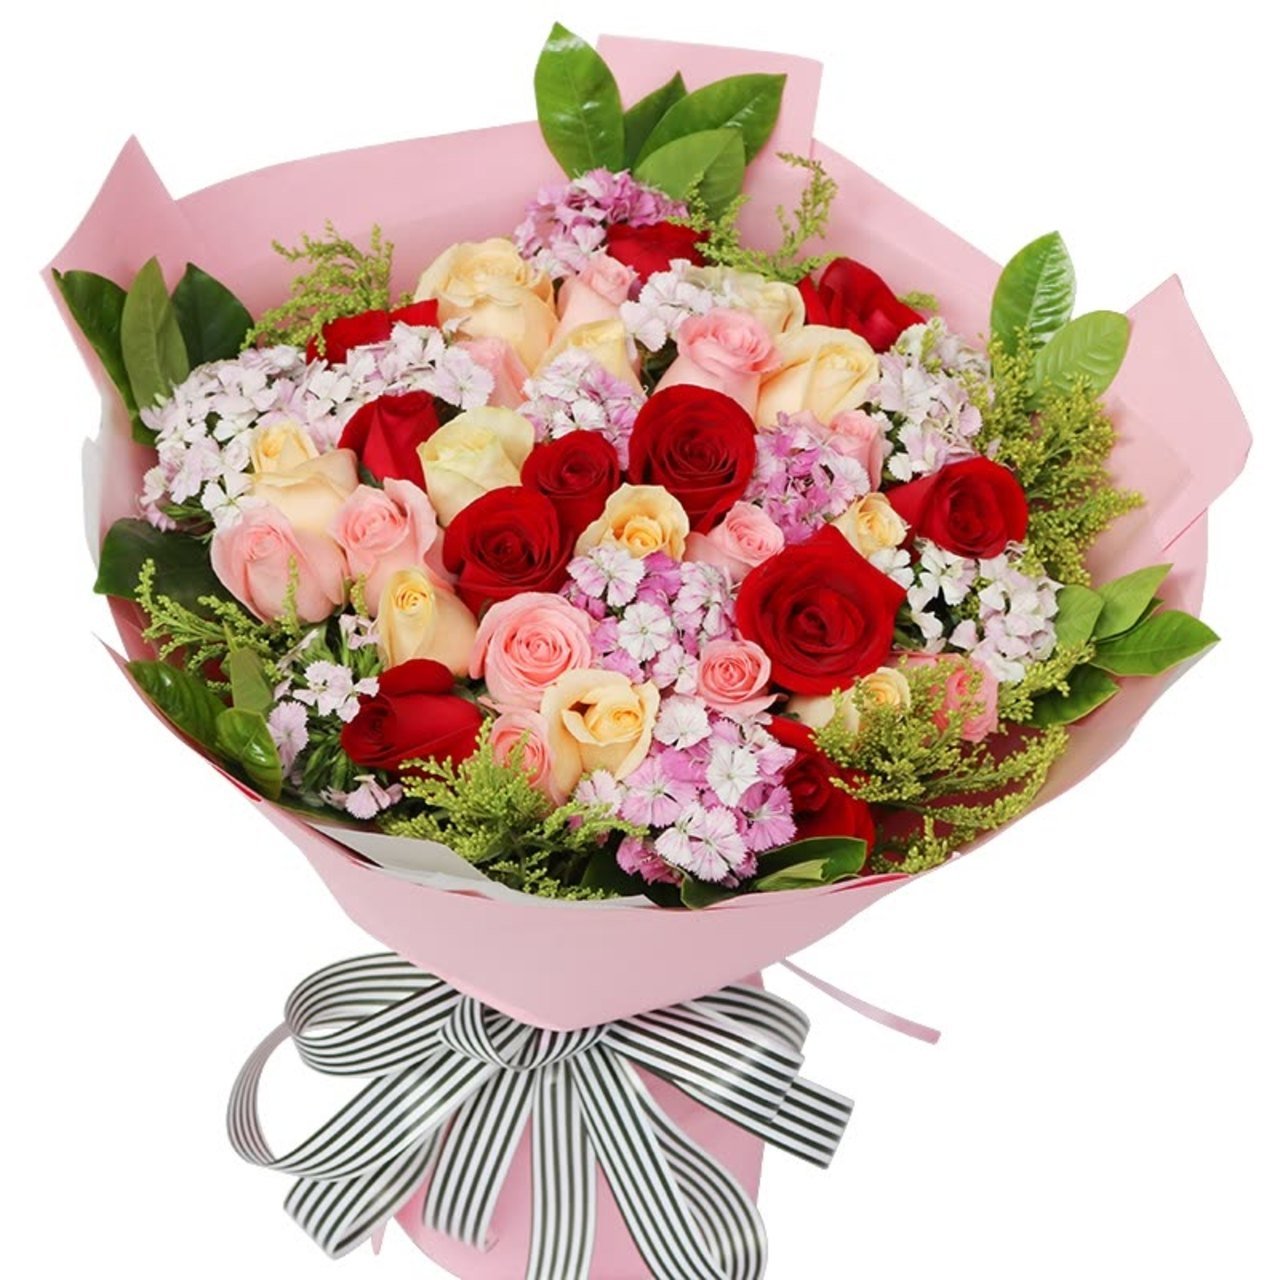 Smiley blooming(
A mix of 33 red, pink and champagne roses-